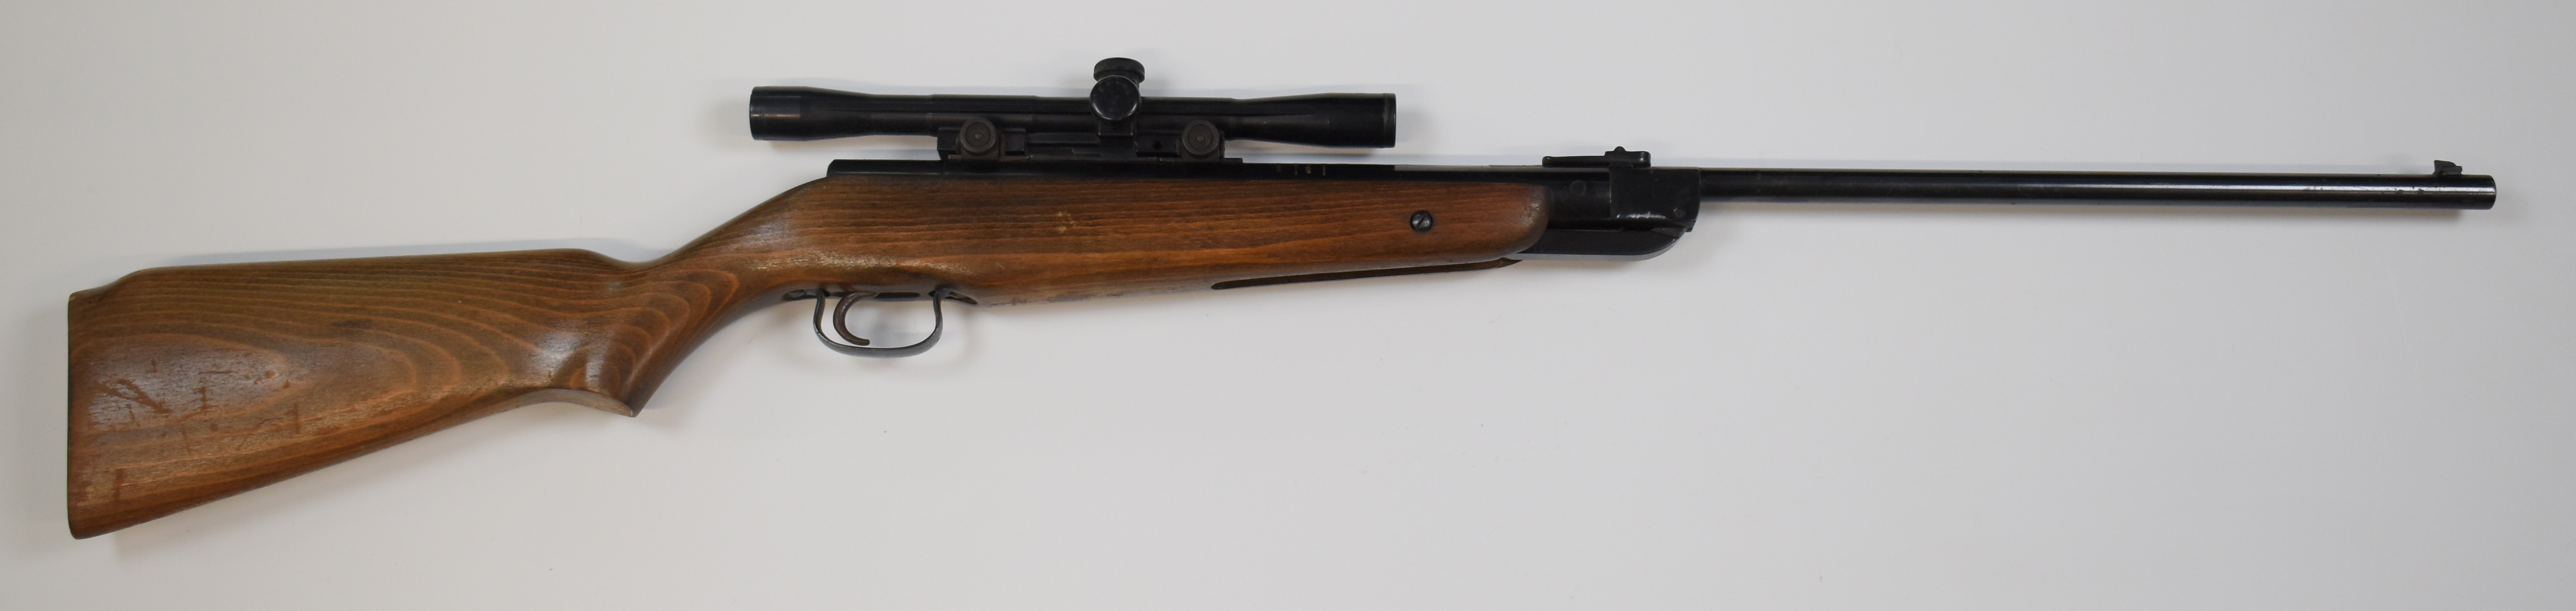 Webley Falcon .22 air rifle with semi-pistol grip, Webley plaque inset to the stock and scope, NVSN. - Image 2 of 9